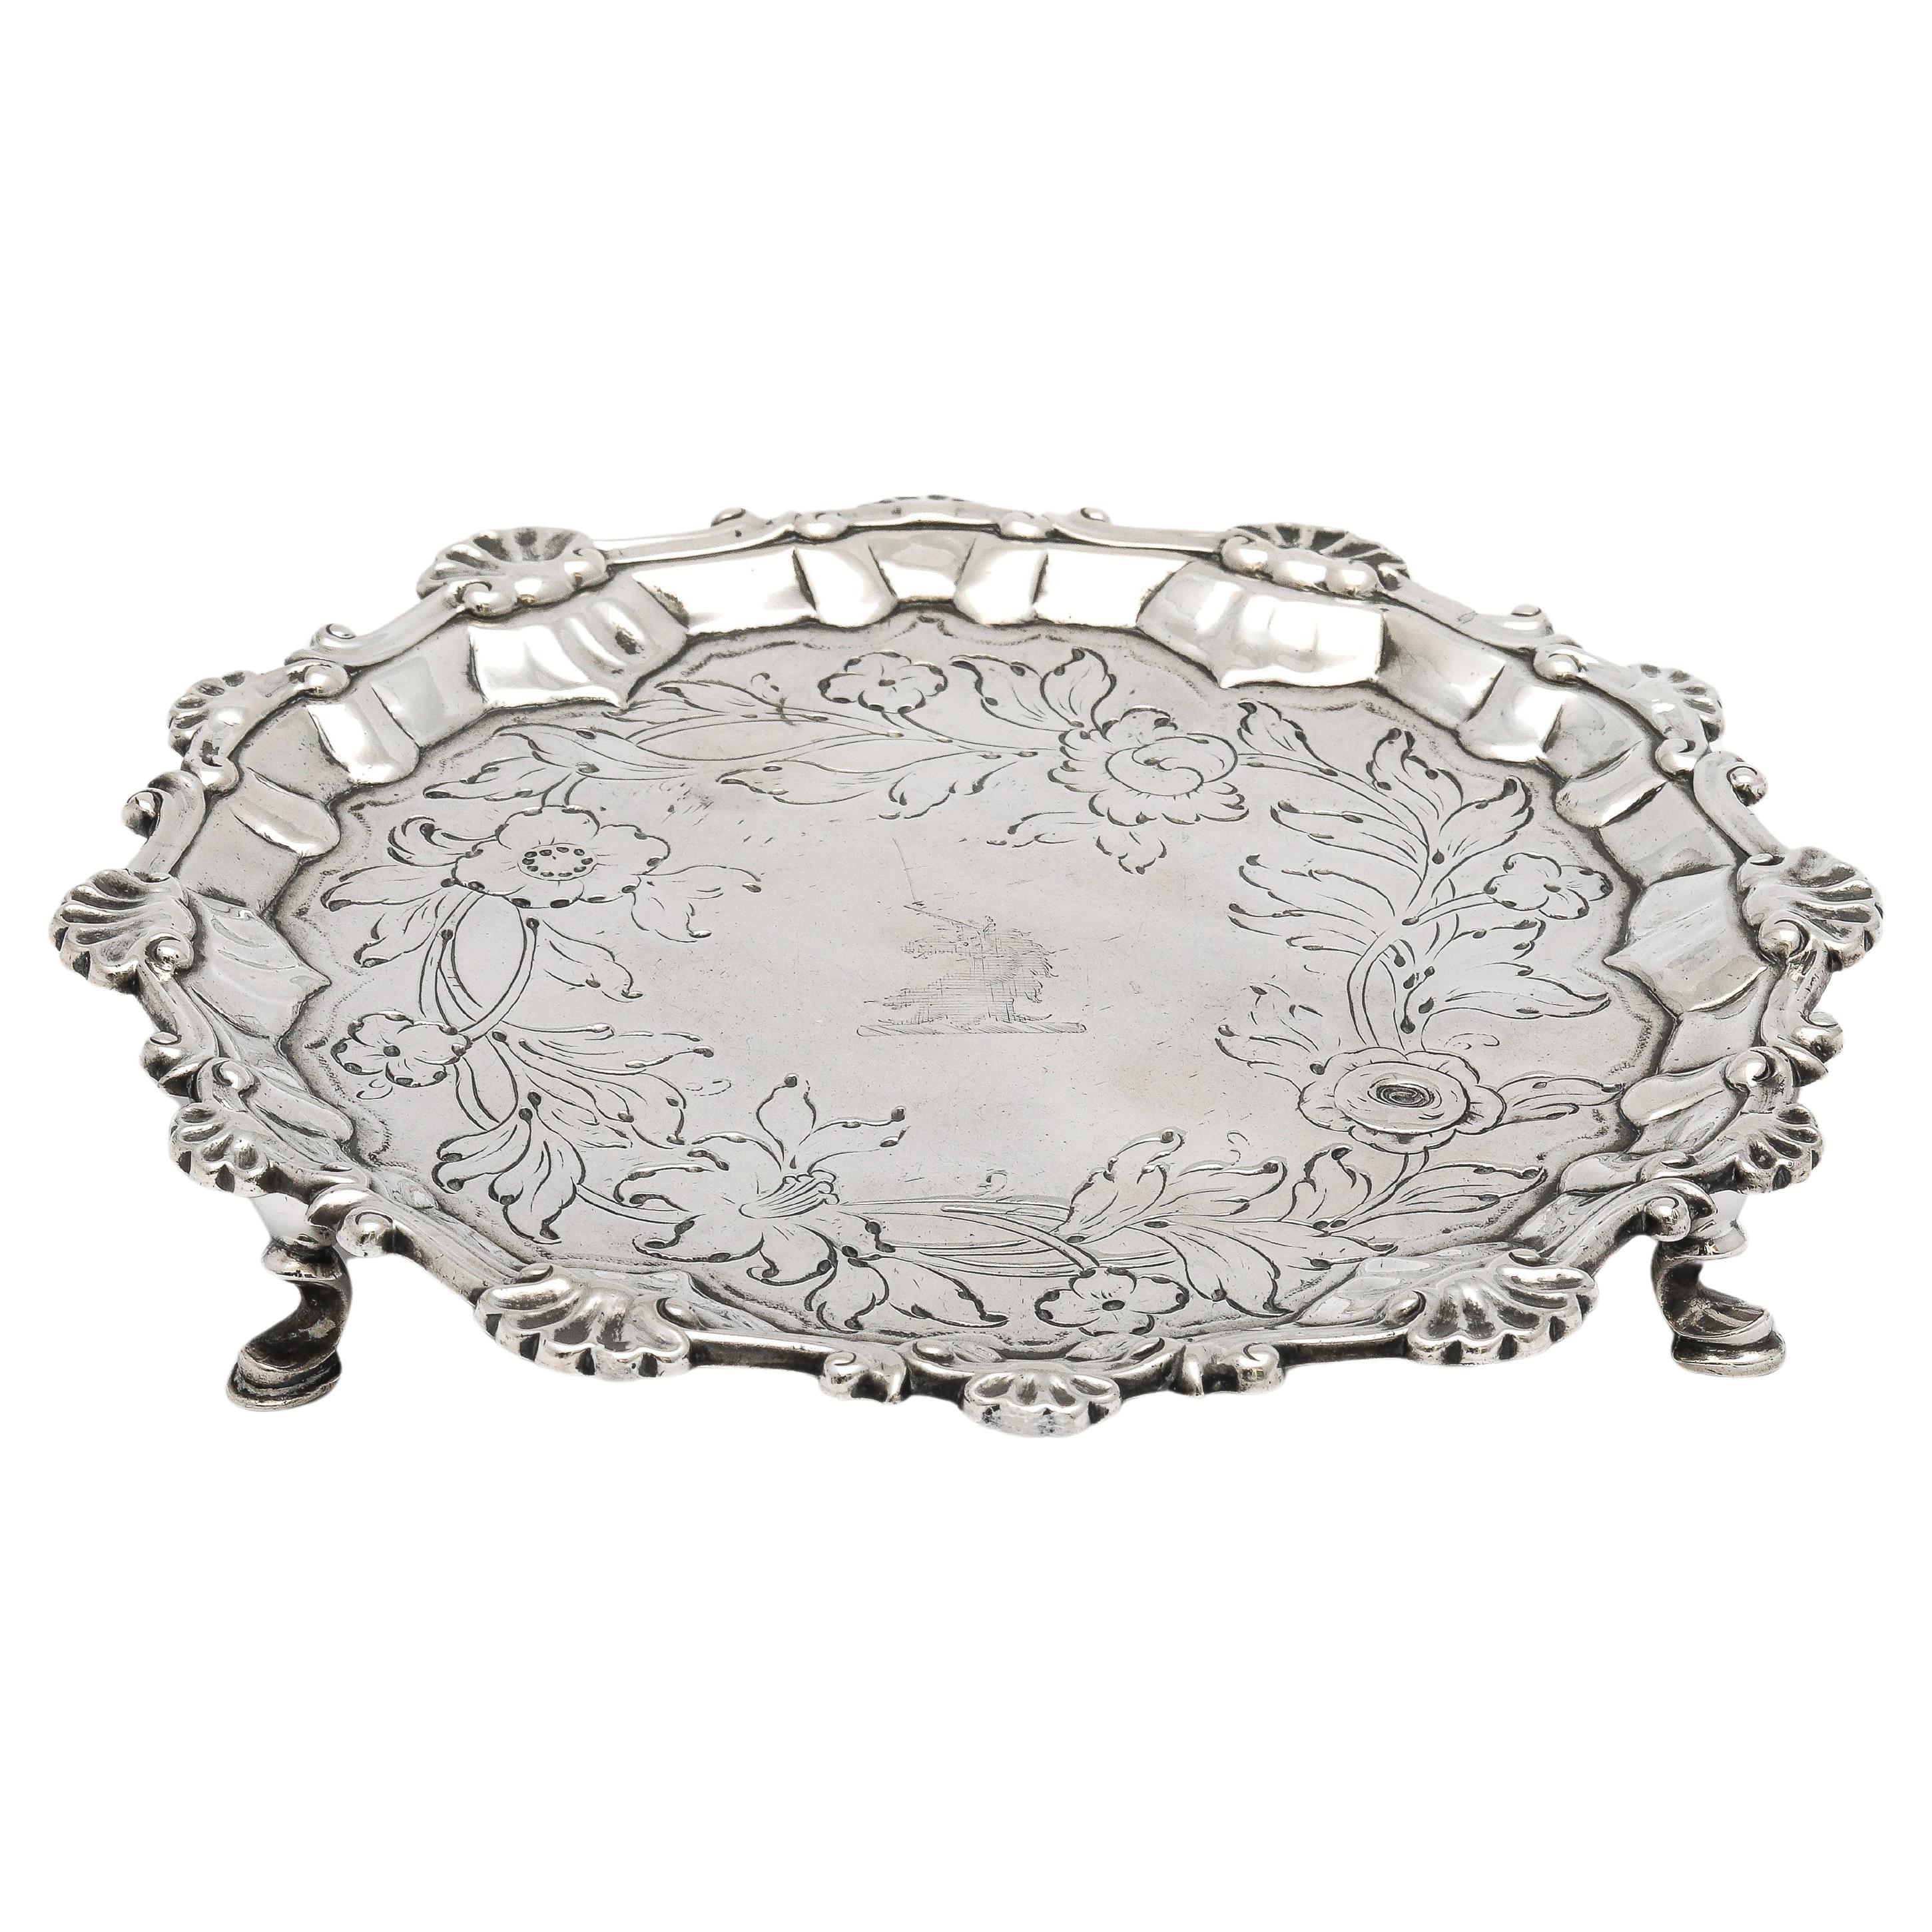 George III Period (1764) Footed Sterling Silver Salver/Tray For Sale